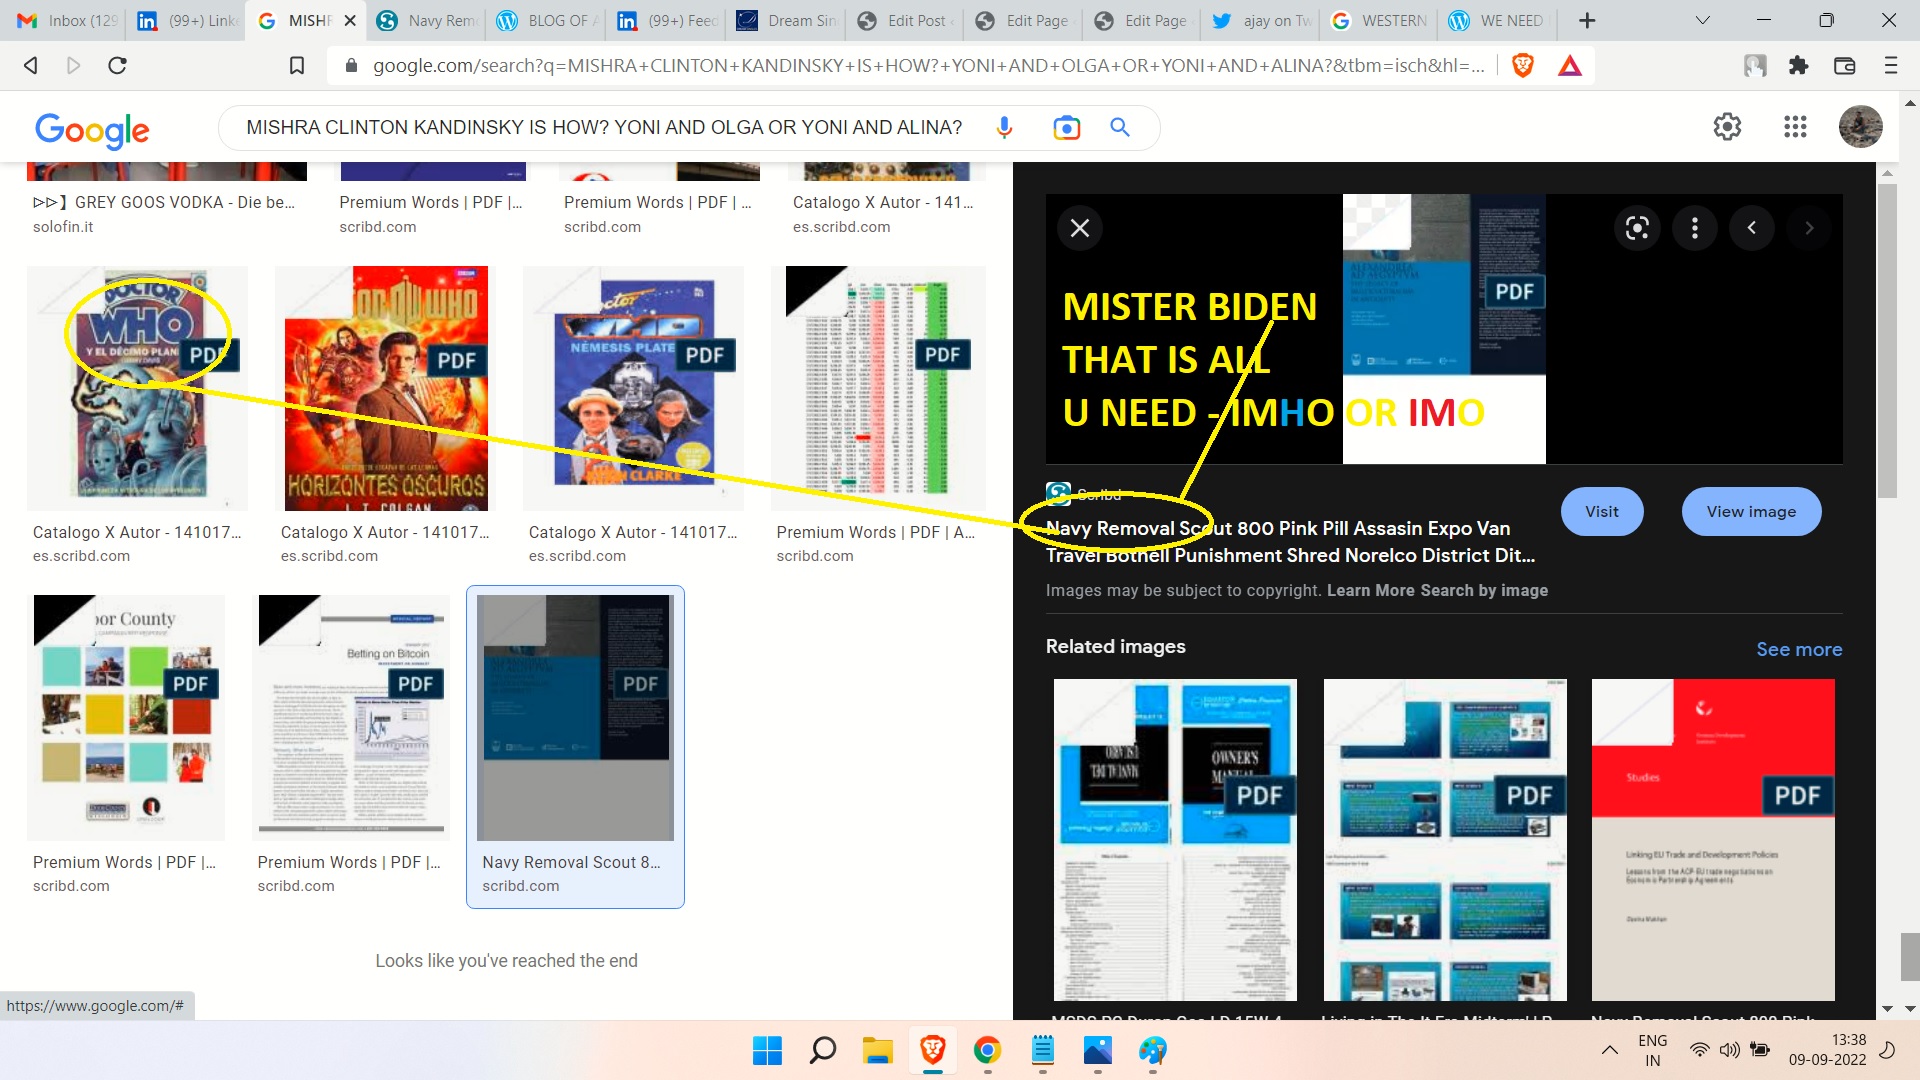 MISHRA CLINTON KANDISNKY IS HOW - ANSWER IS YONI NETANYAHU AND ALAINA AND NOW SU,NDAR PICHAI AND GOOGLE THIS IS LAST -TIME DONT CHNAGE YOUR IMAGES BECASSED ON WHAT THEY DECIDE WHAT I SAID